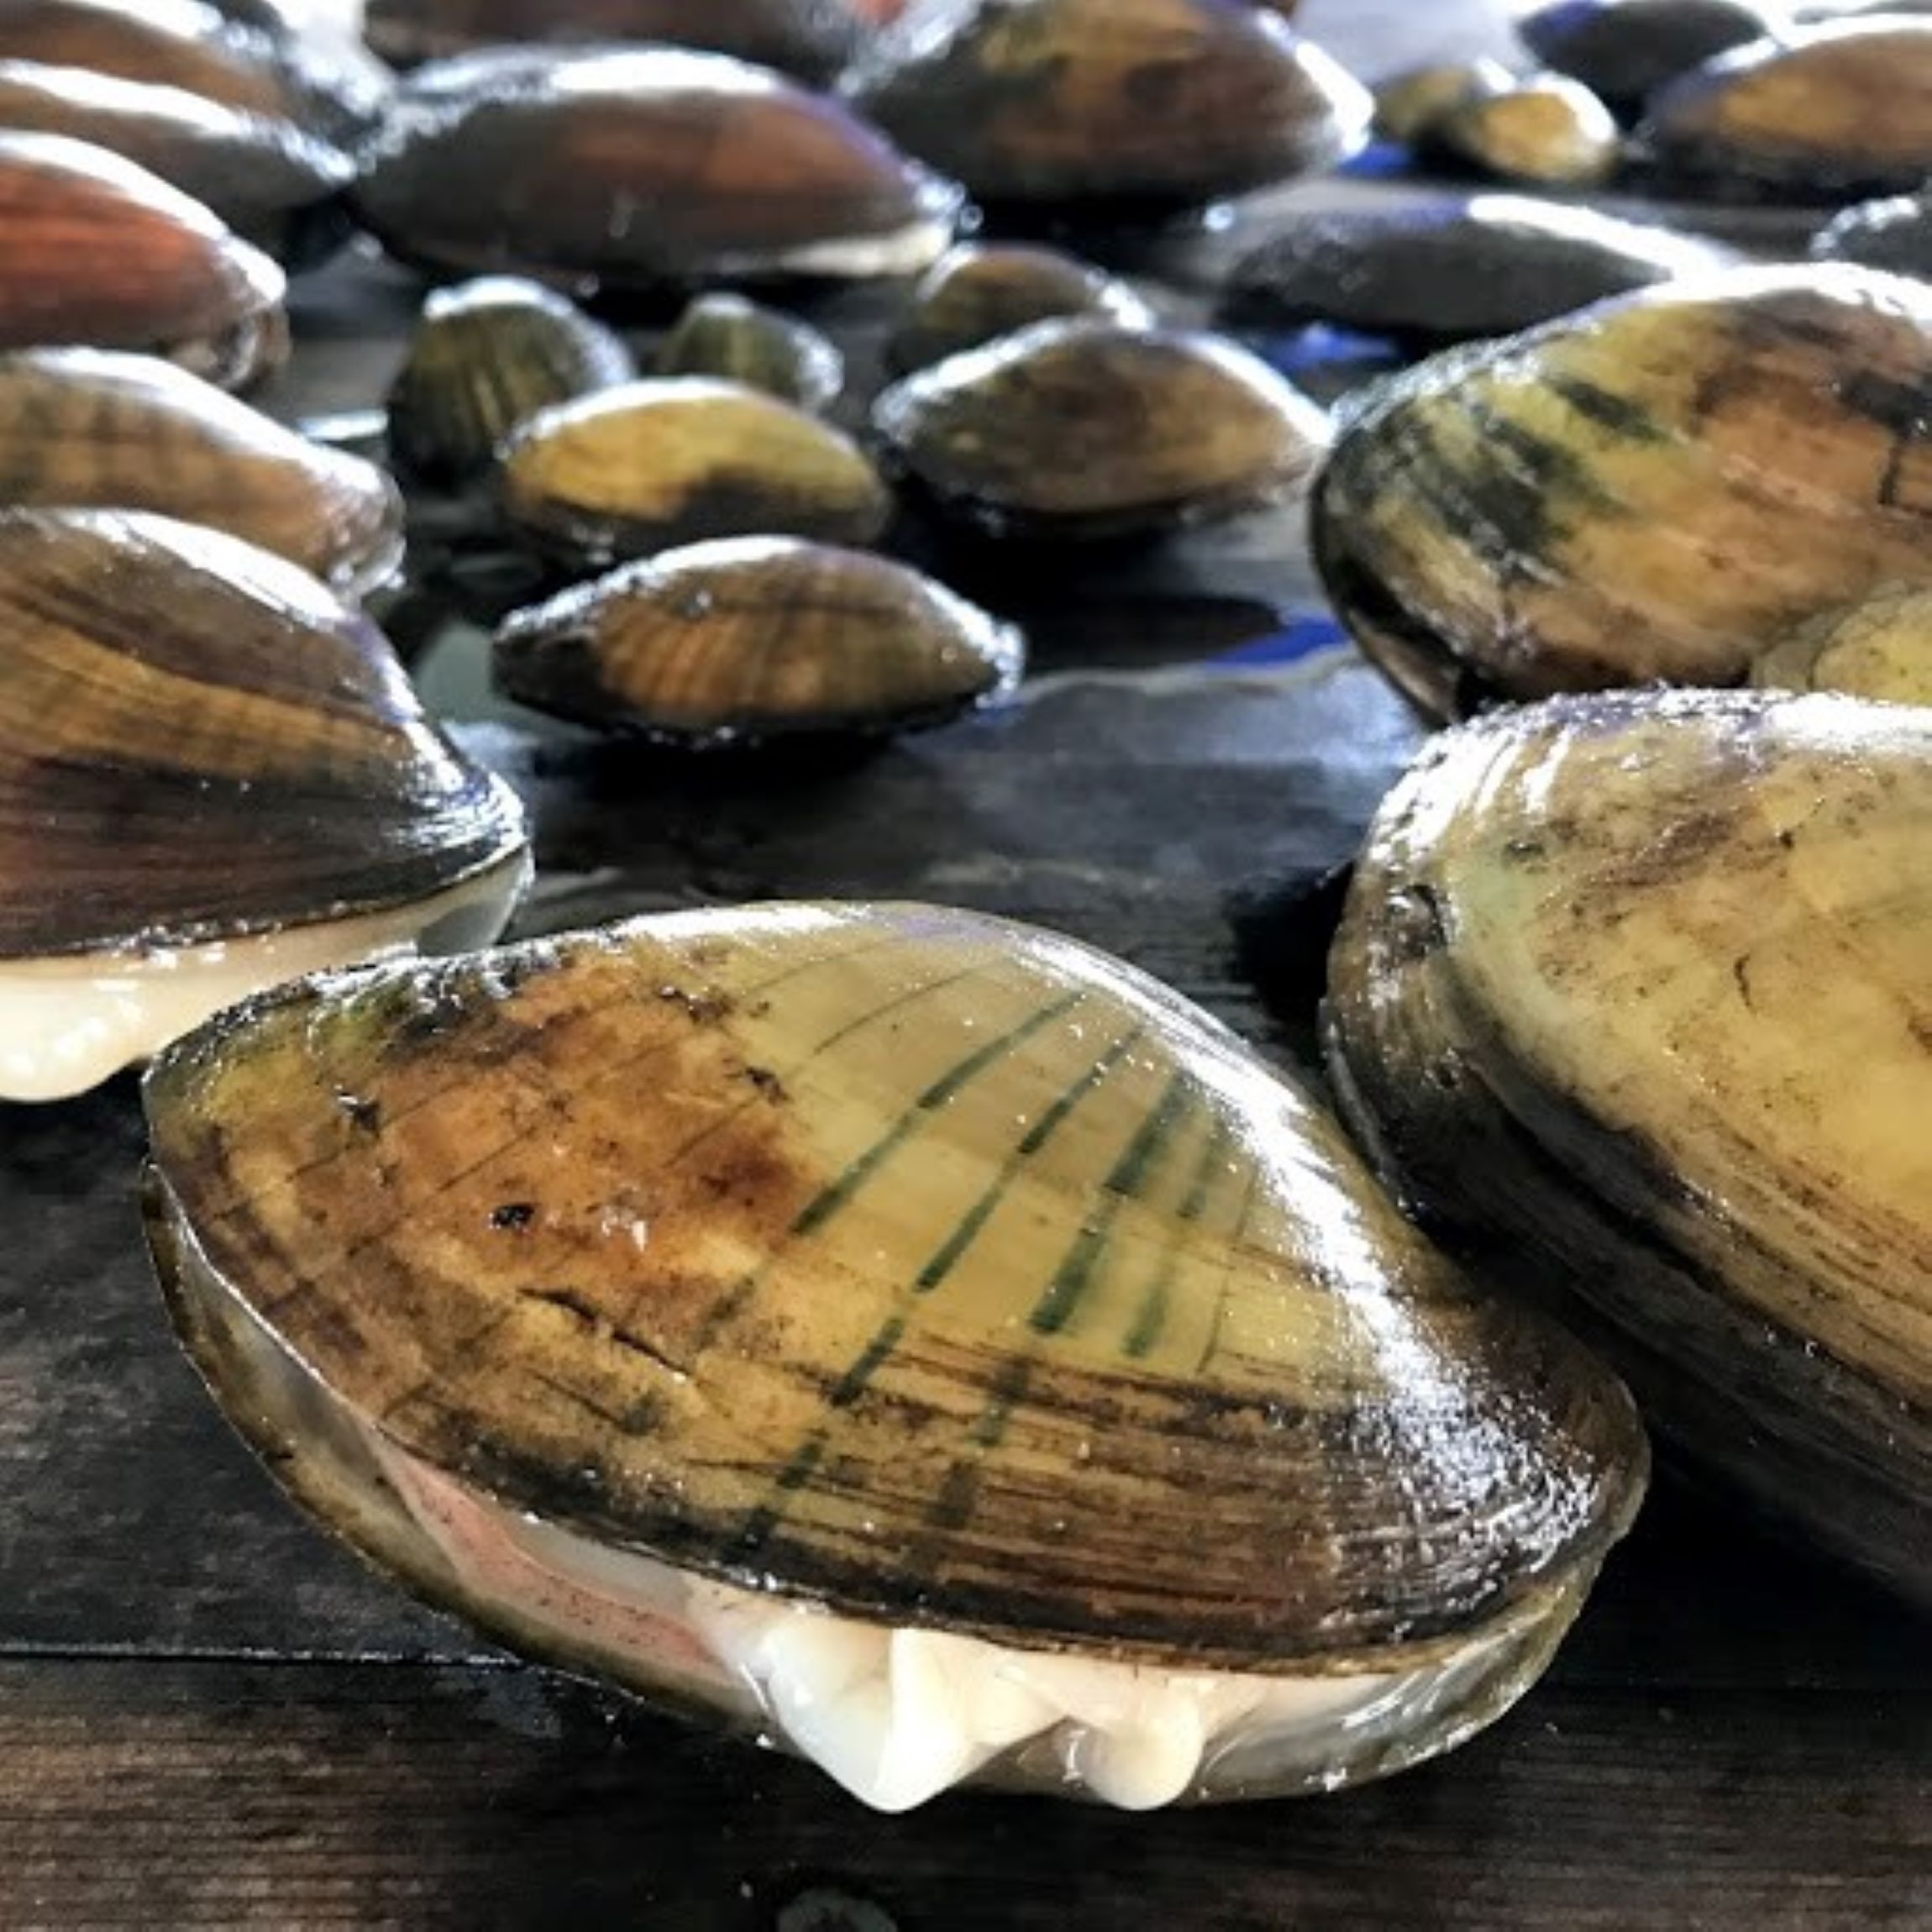 Mass die-off of freshwater mussels in Wisconsin leads to discovery of new parasite